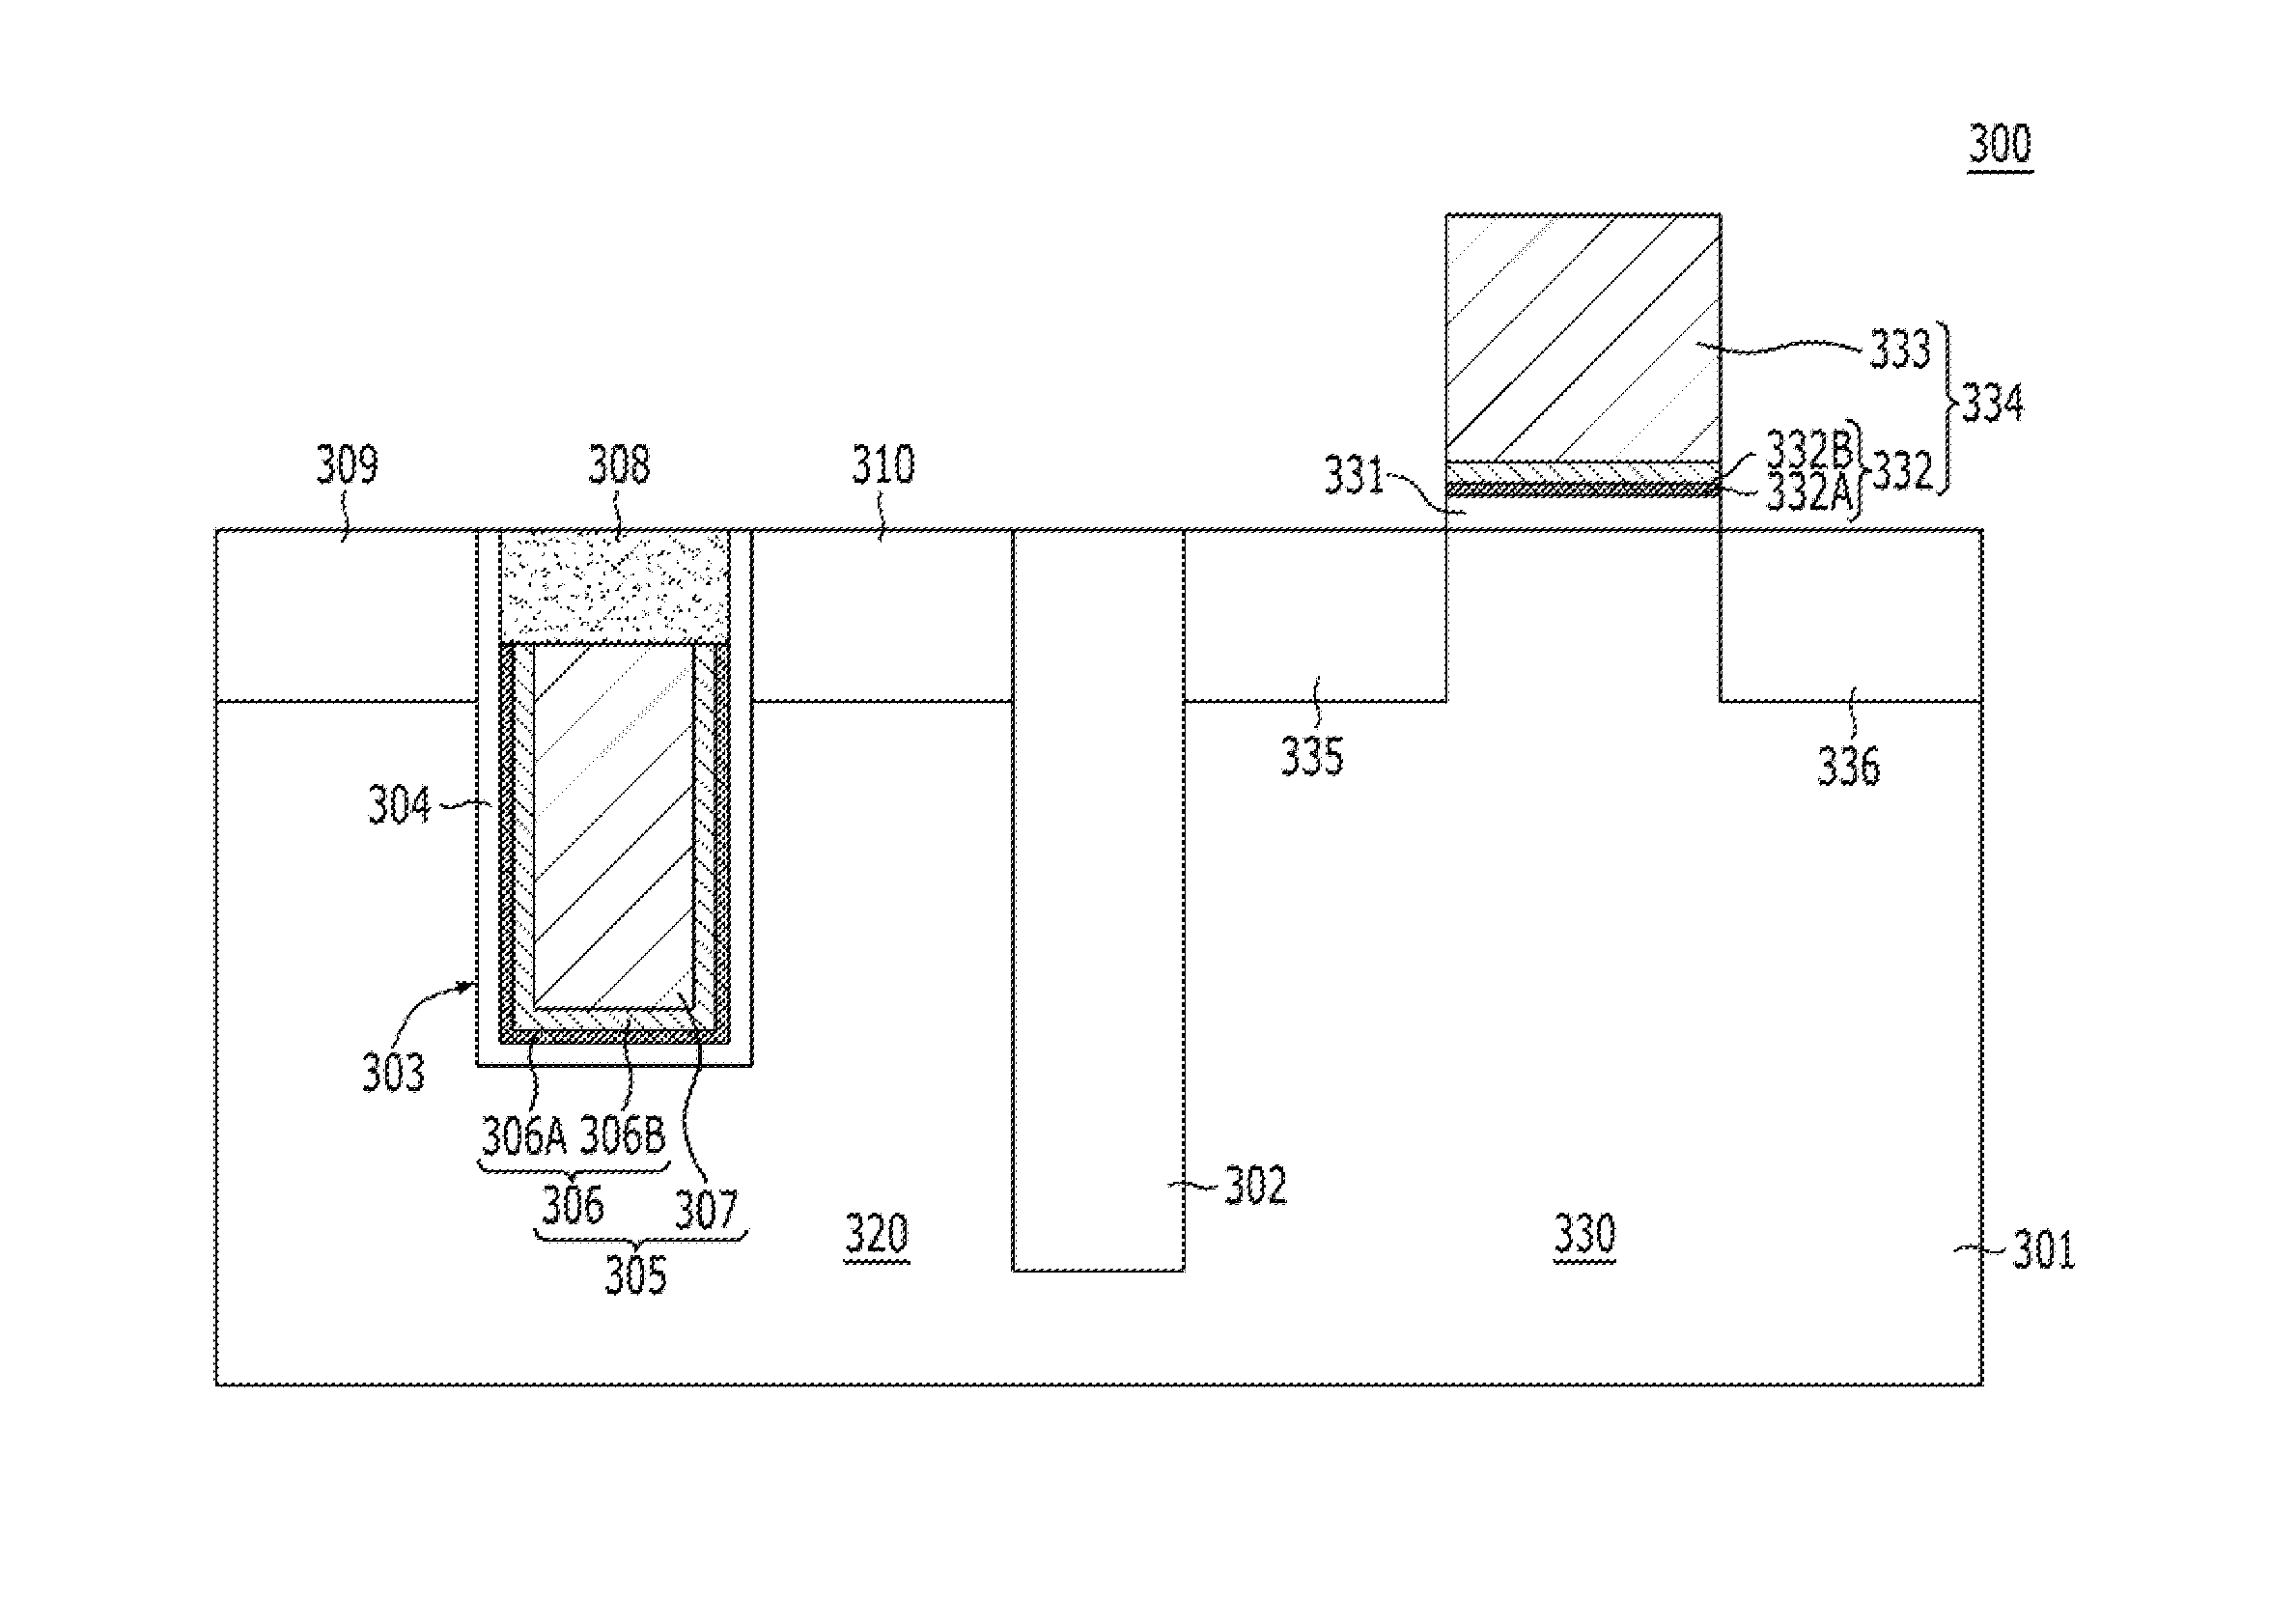 Transistor having tungsten-based buried gate structure, method for fabricating the same